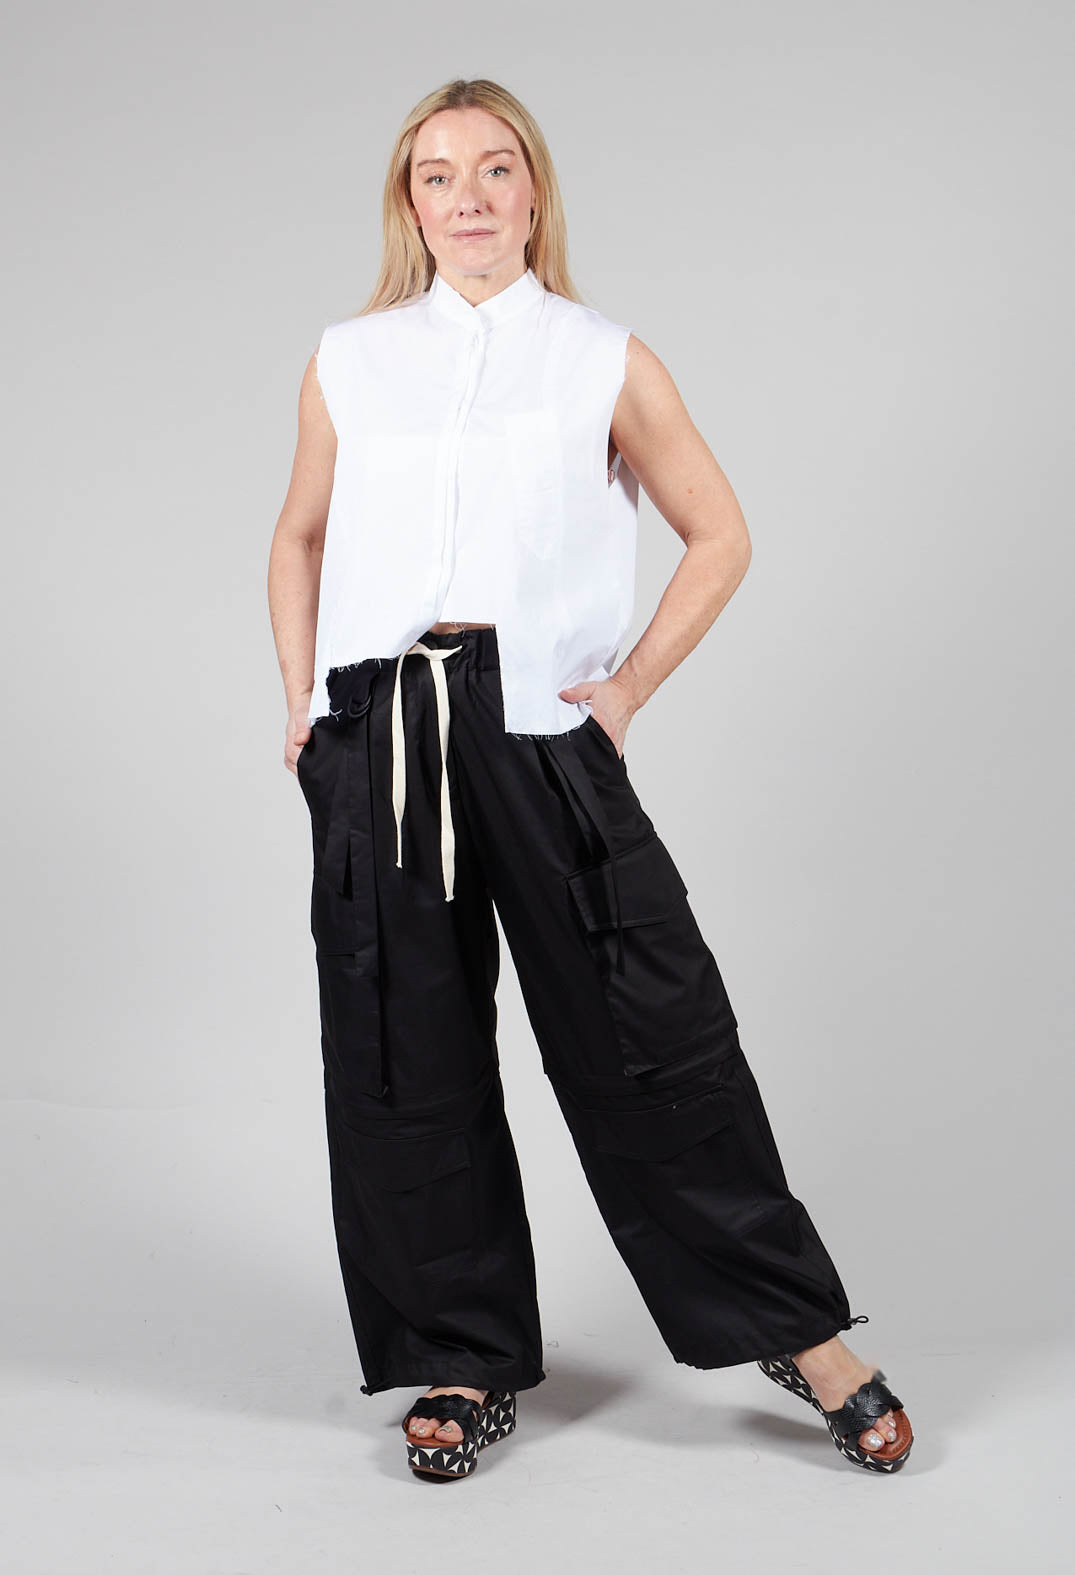 Trousers in Black